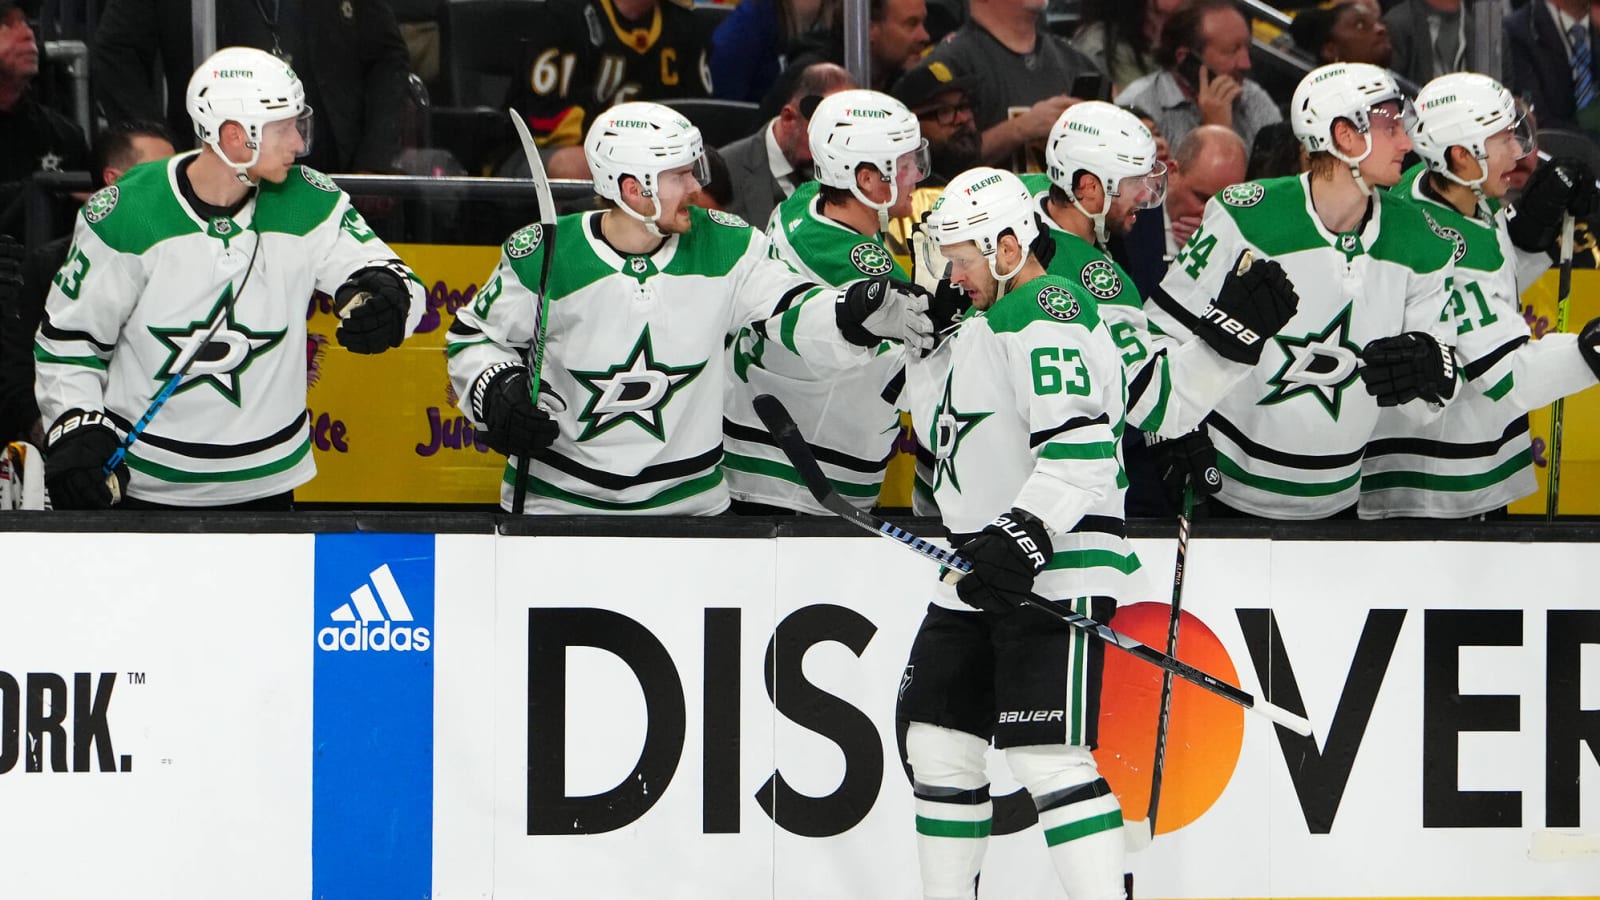 Watch: Stars, Golden Knights trade goals in first period of Game 5